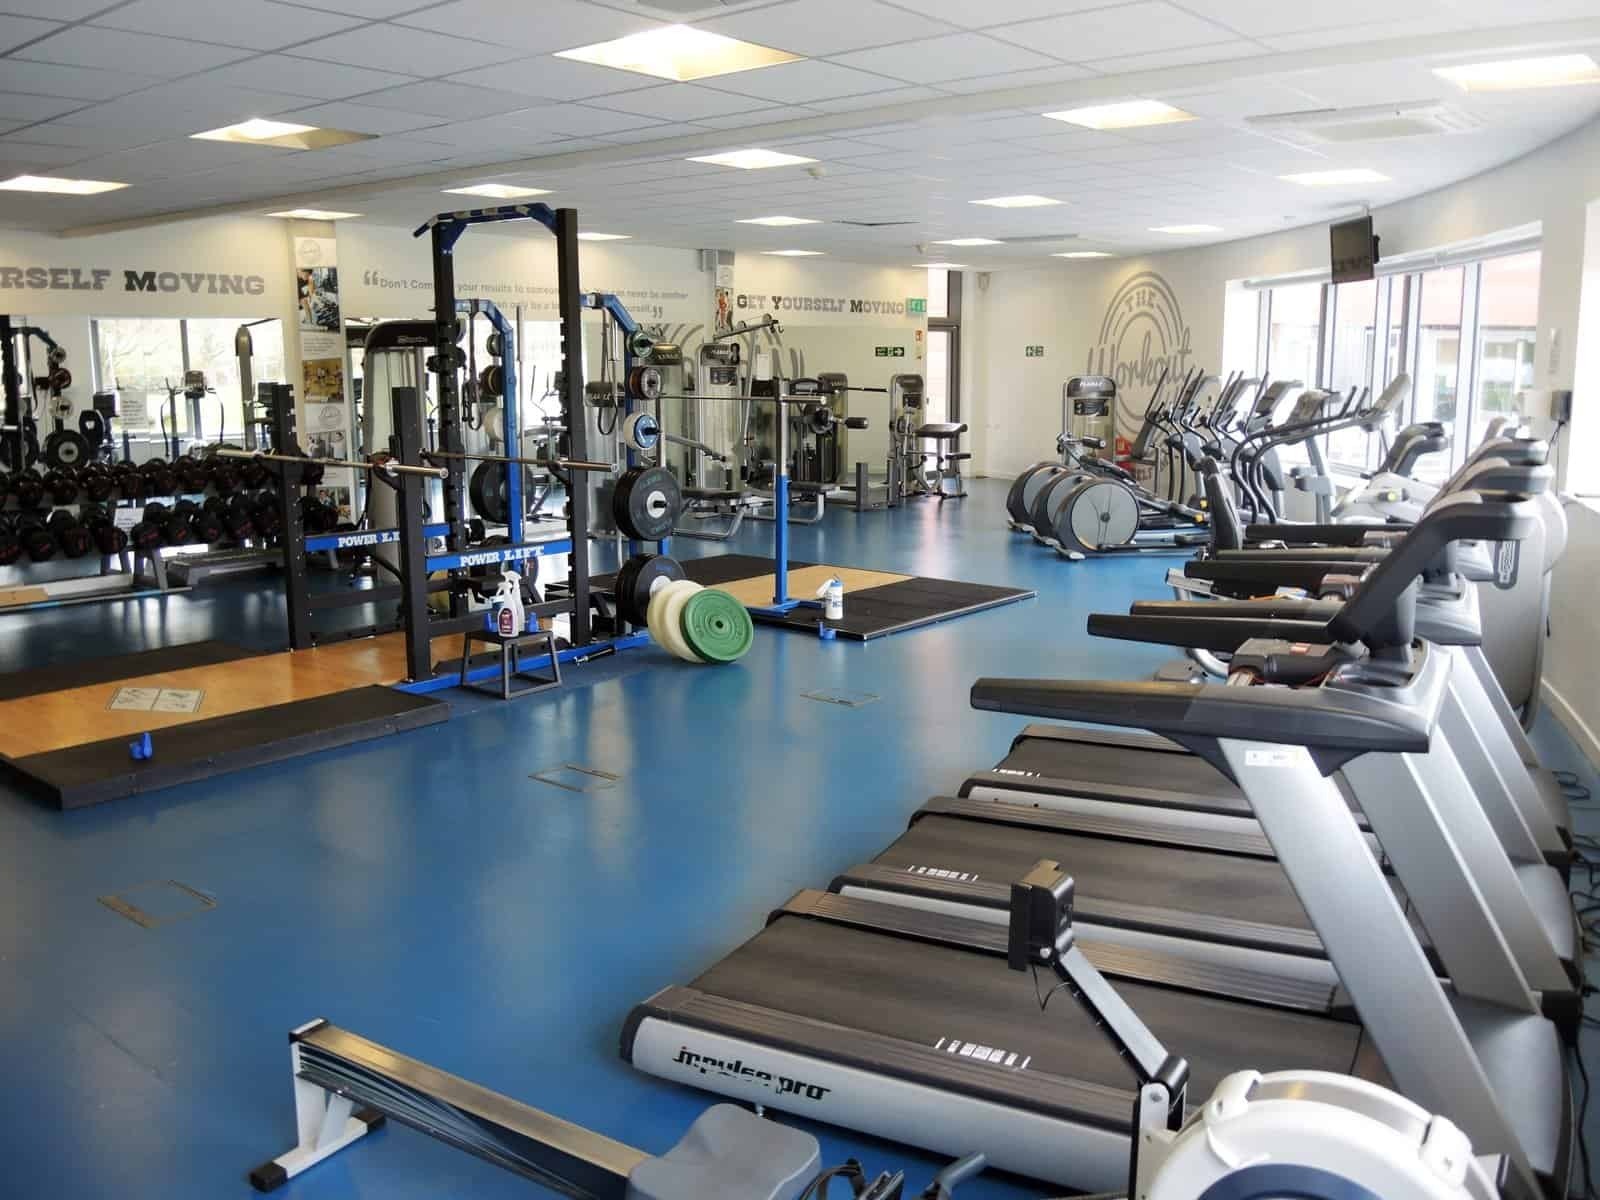 The Workout gym at Dumfries and Galloway College on Dumfries Campus